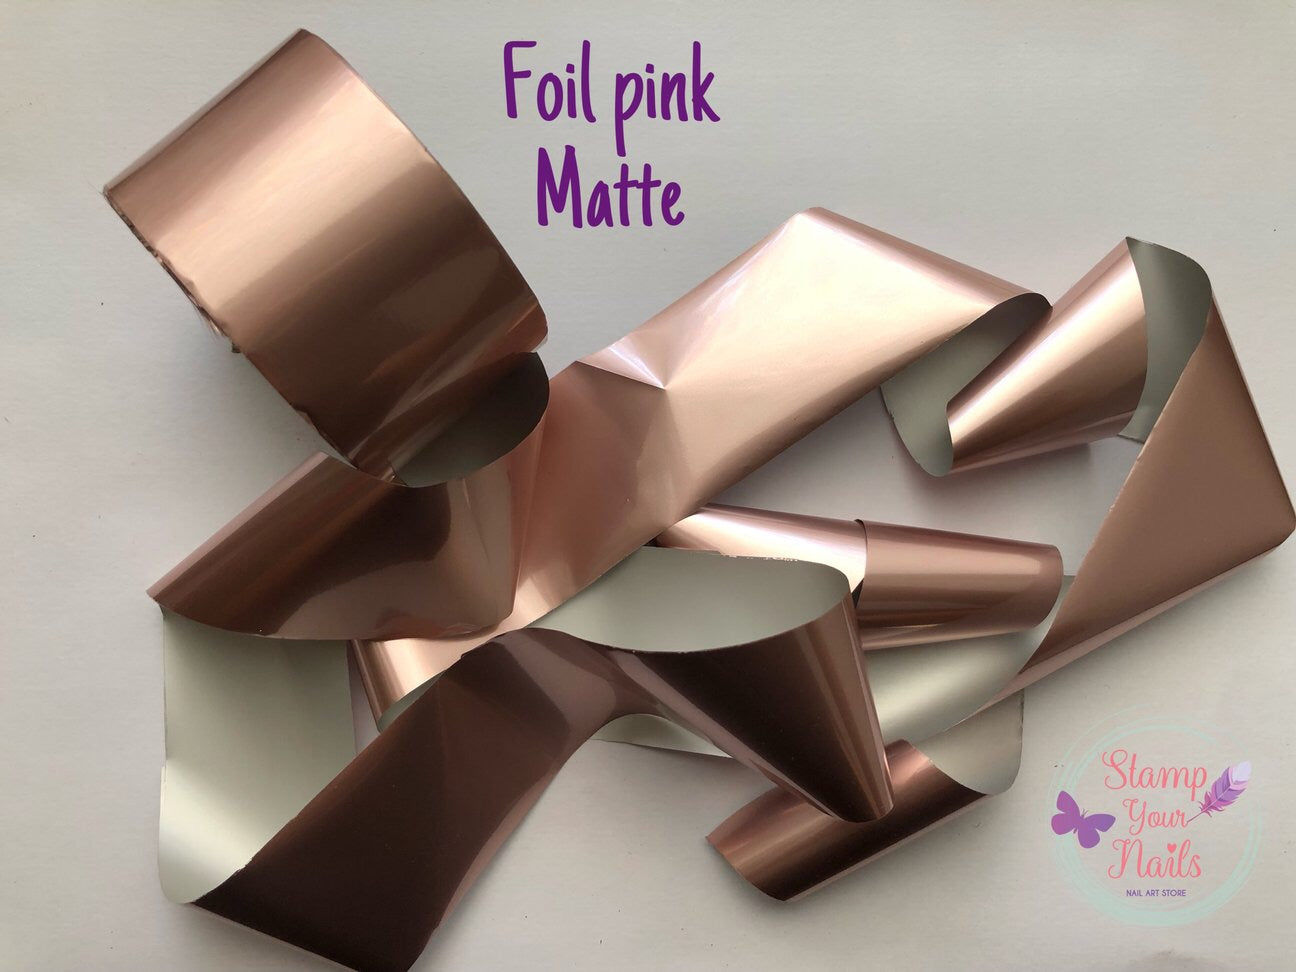 Foil rose gold mate - Stamp your nails